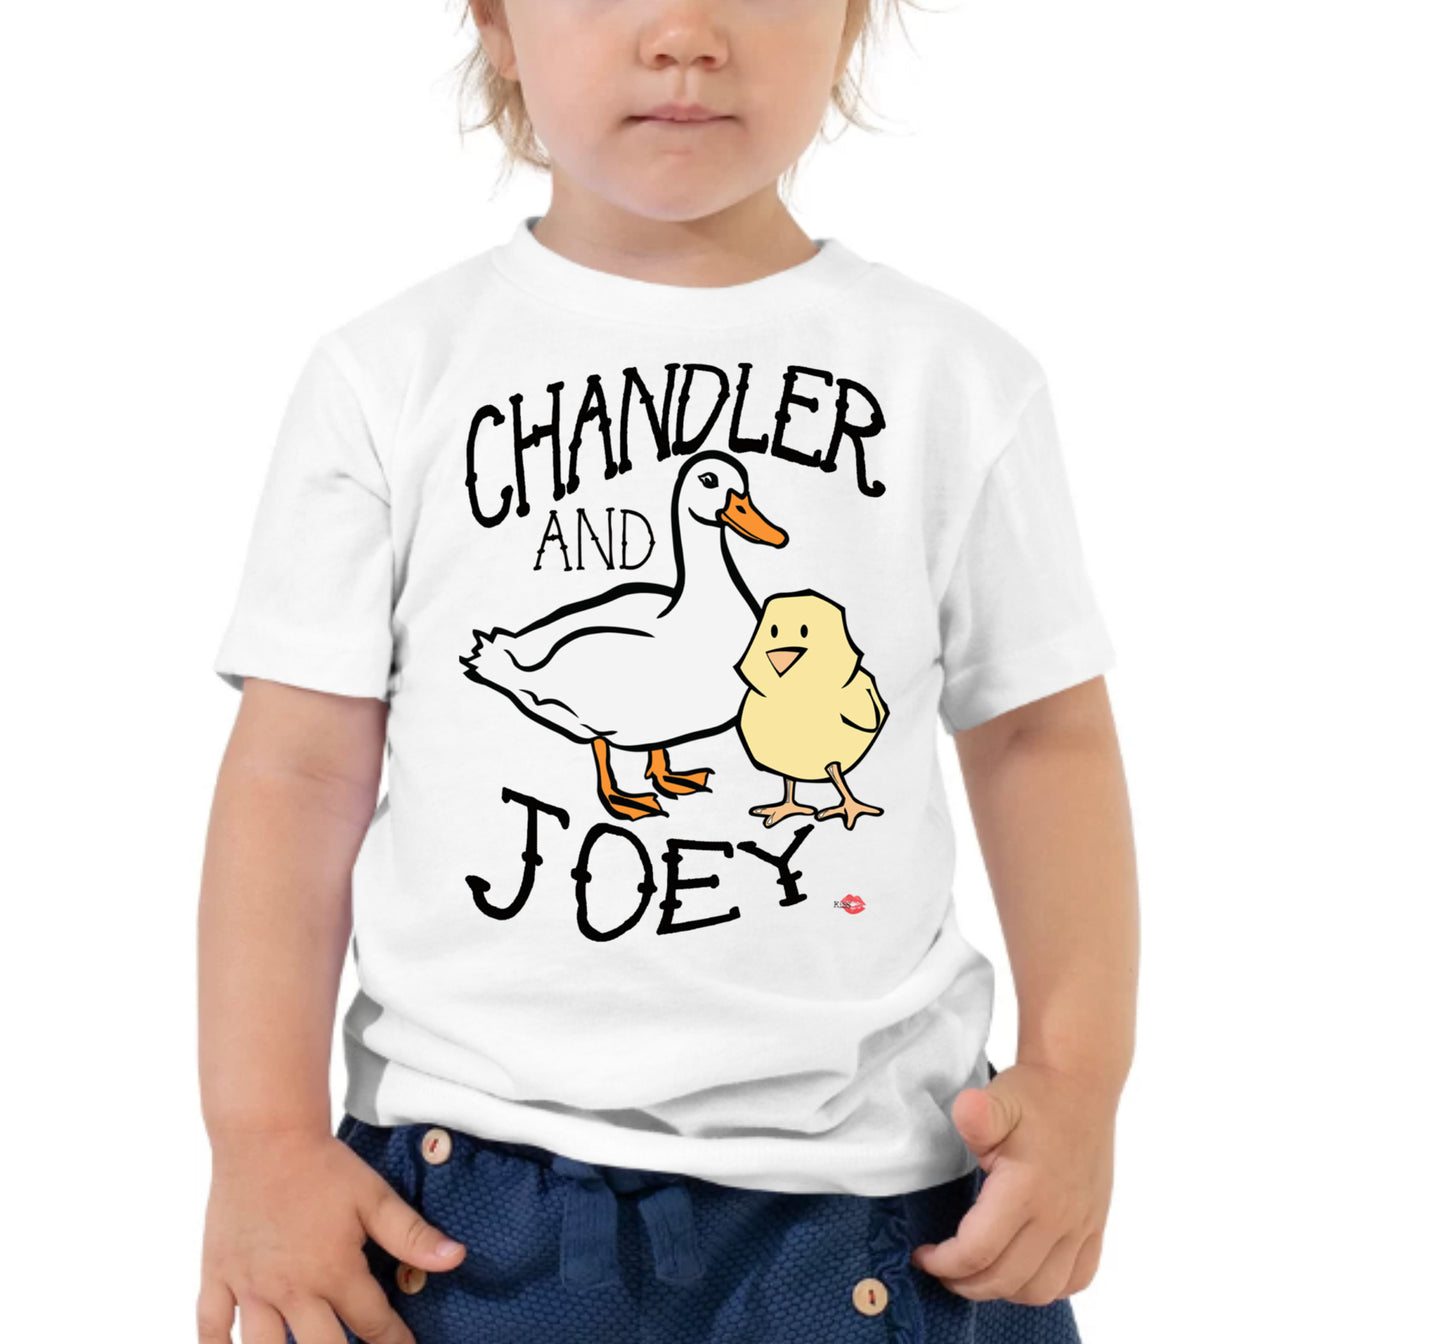 Joey and Chandler KiSS Youth Short Sleeve T-Shirt - Friends Show inspired Chick & Duck